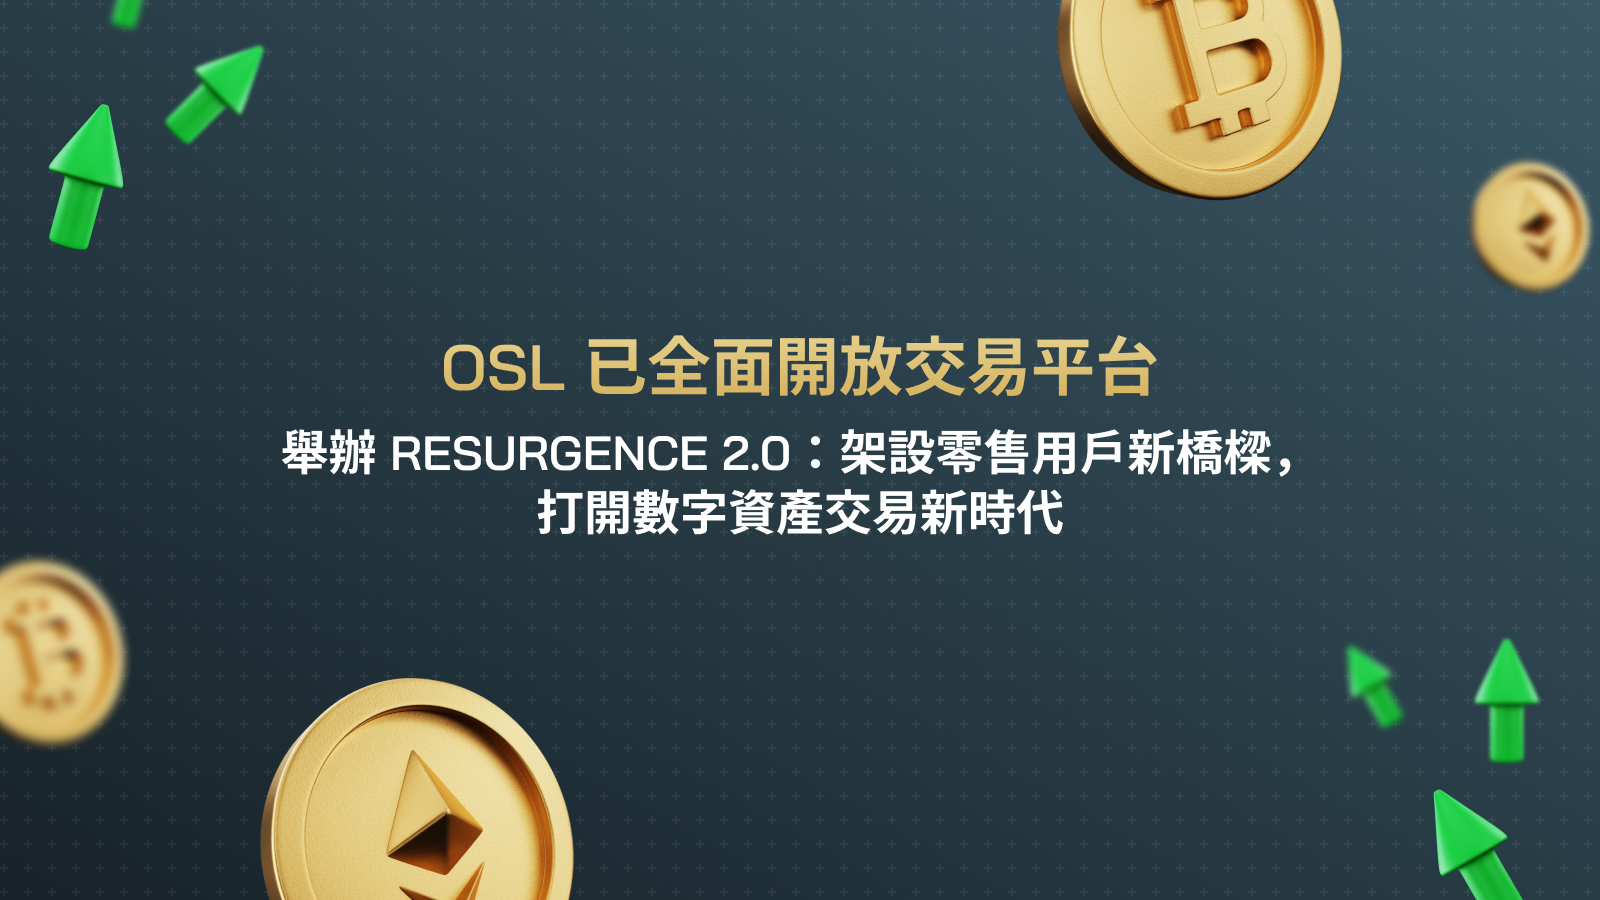 OSL's Fully Launched Operational Retail Platform Shines Bright Resurgence 2.0 Ushers in a New Era for Retail Investors in Digital Asset Trading